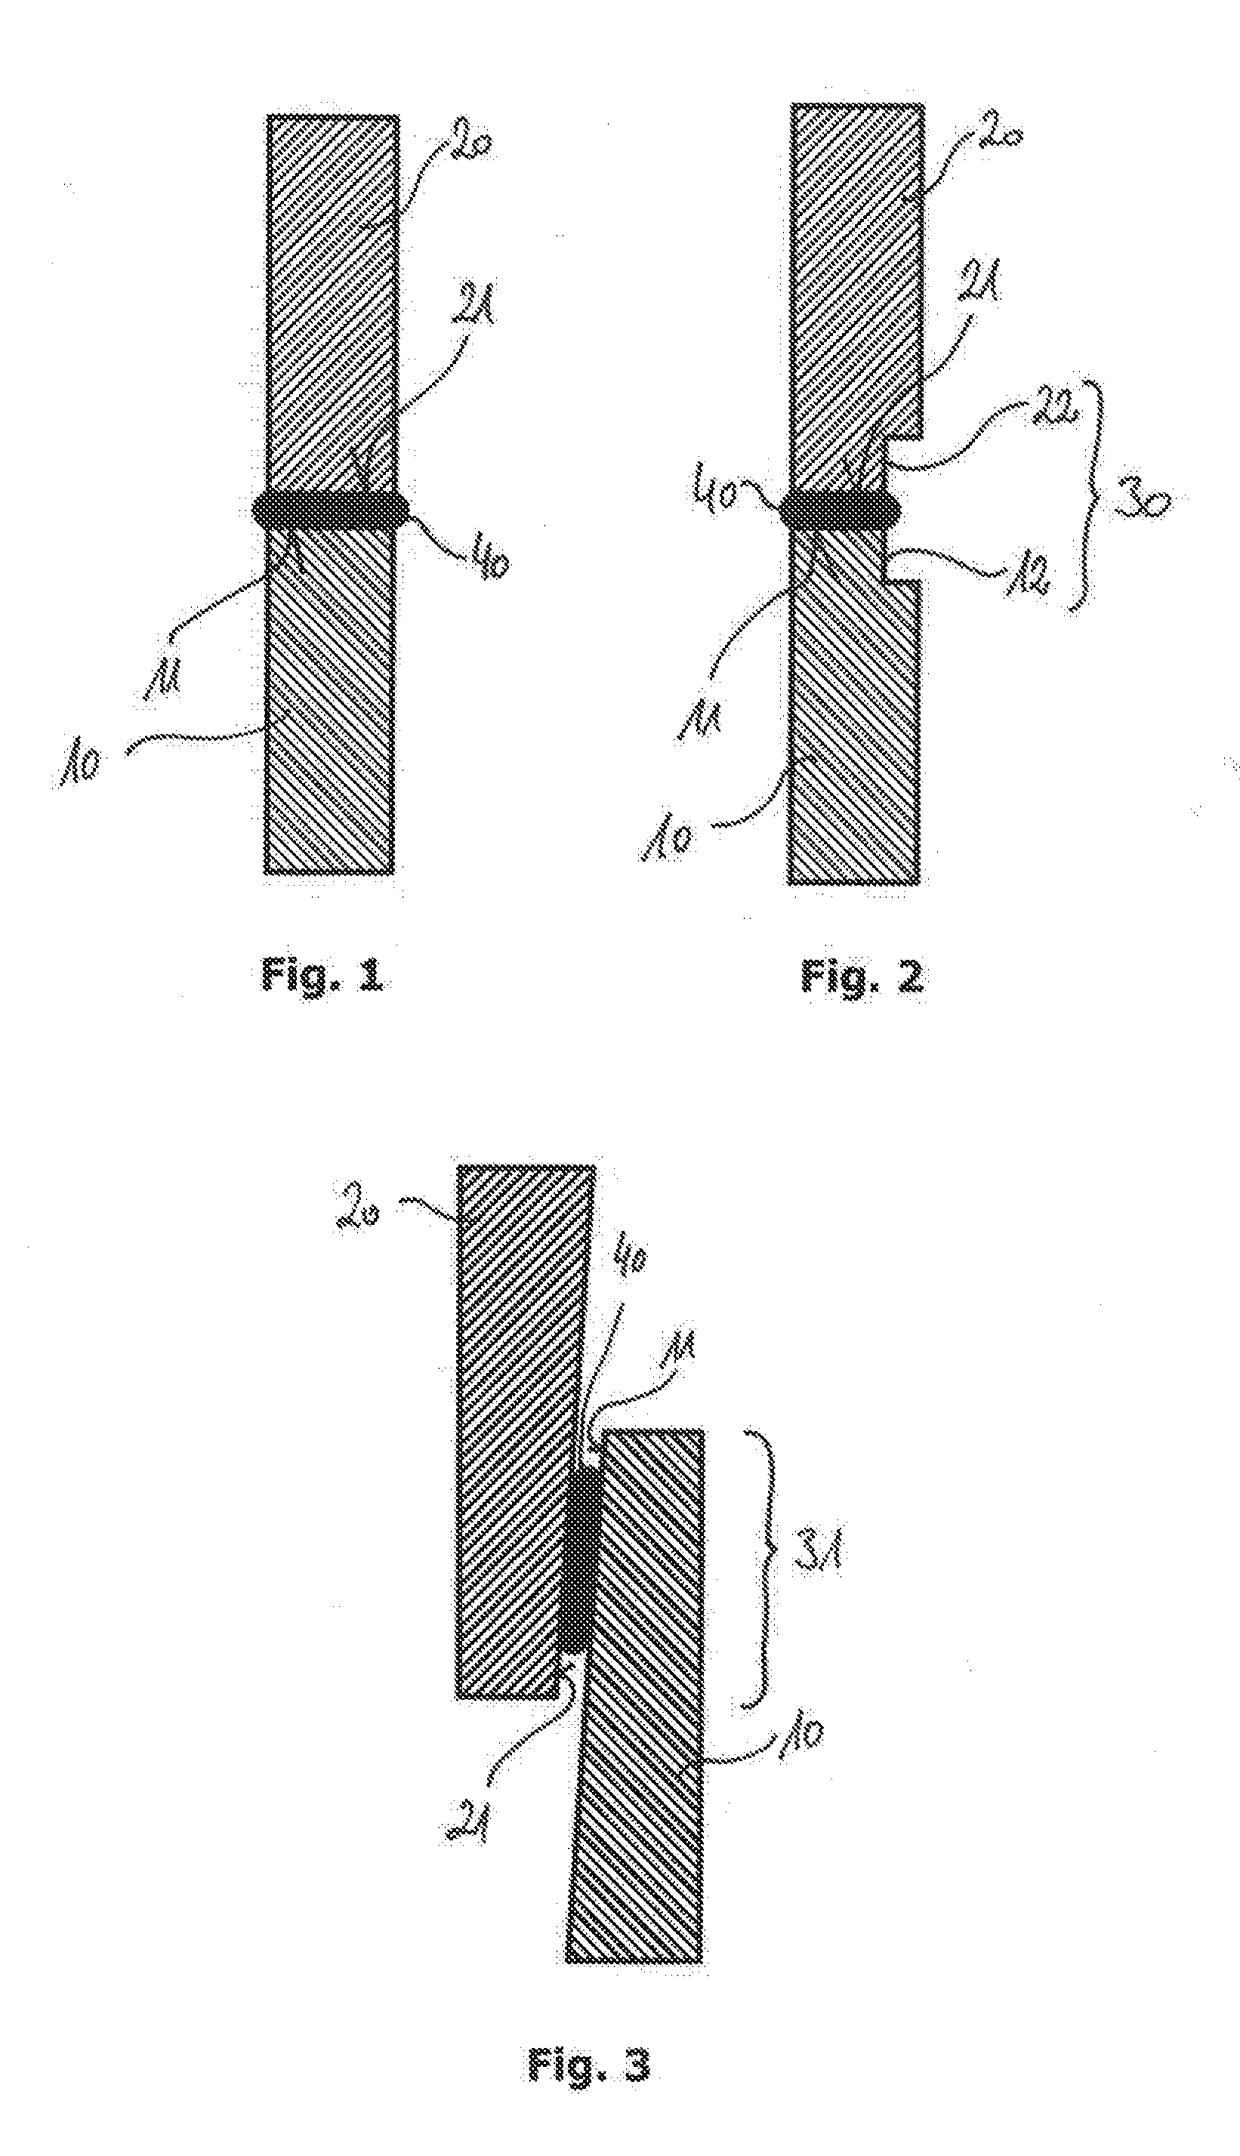 Gear housing especially for an epicyclic gear set and method of making same